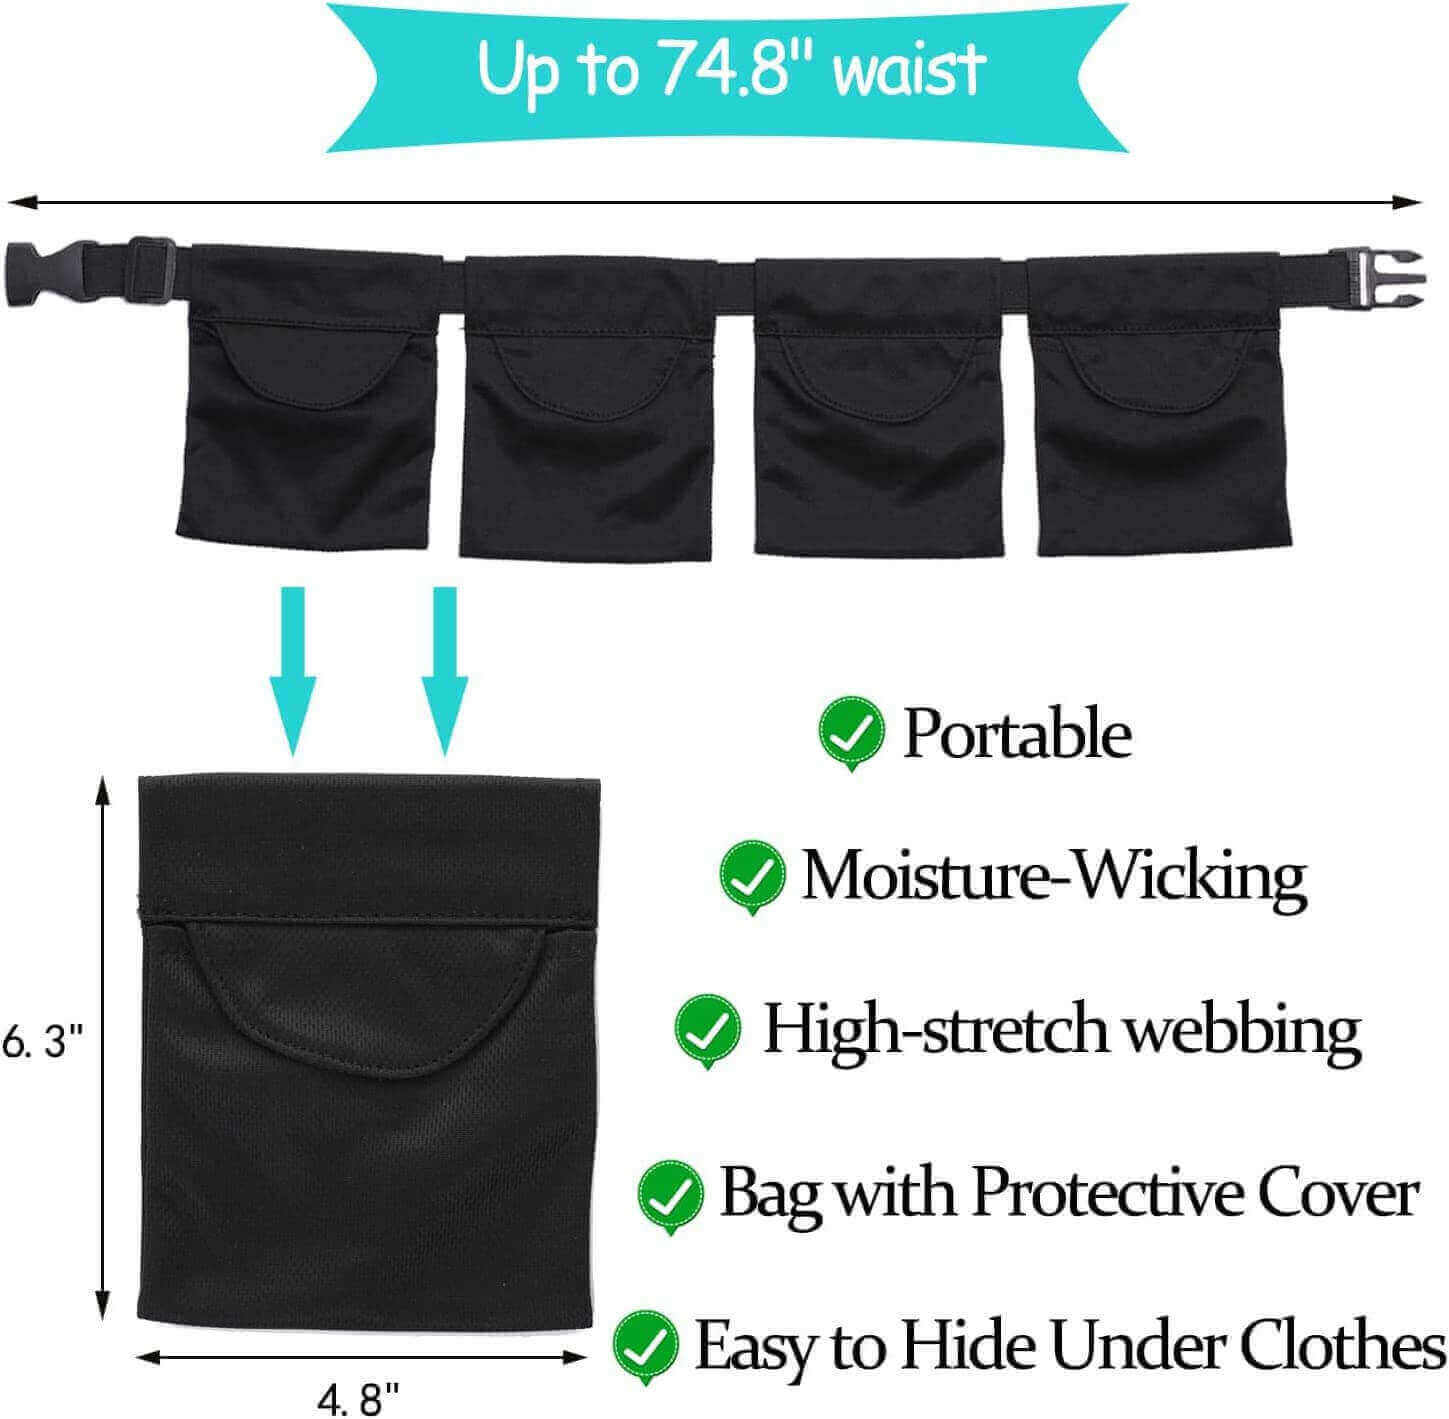 Ostomy Bag Cover, Colostomy Bag Cover, Portable Washable Ostomy Pouch  Shower Cover, Ostomy Support Garment Pouch with Round Opening for Ileostomy